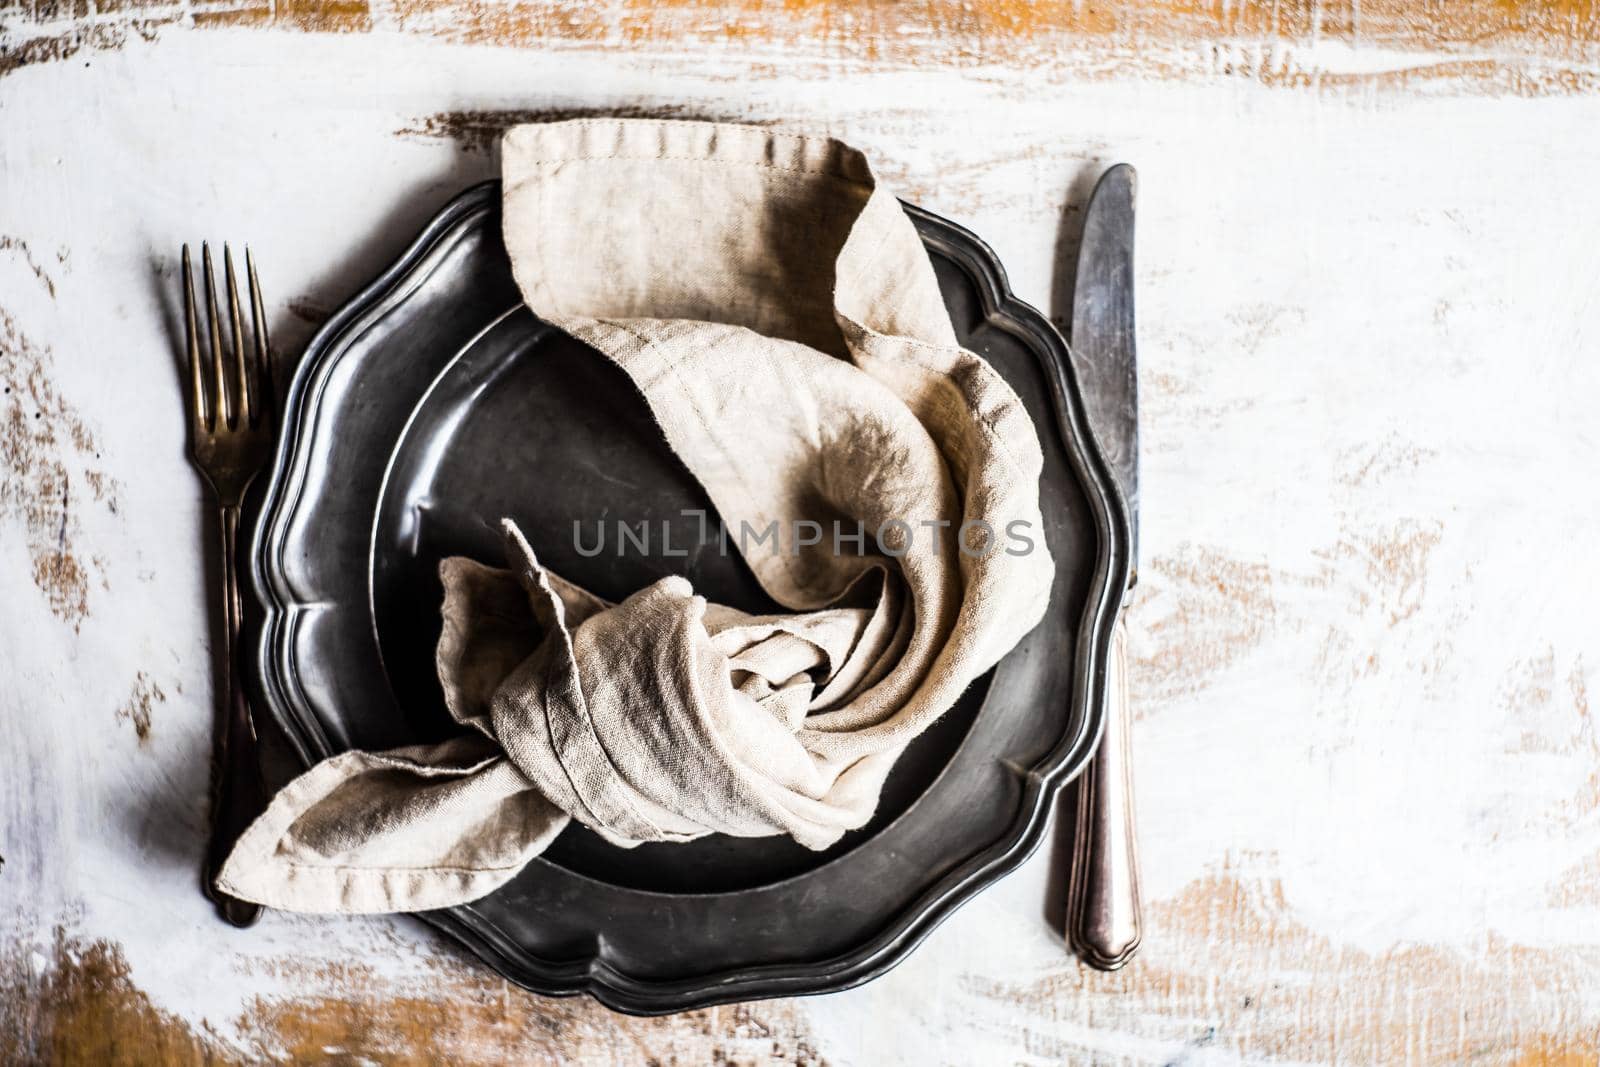 Rustic table setting with vintage cutlery on wooden table